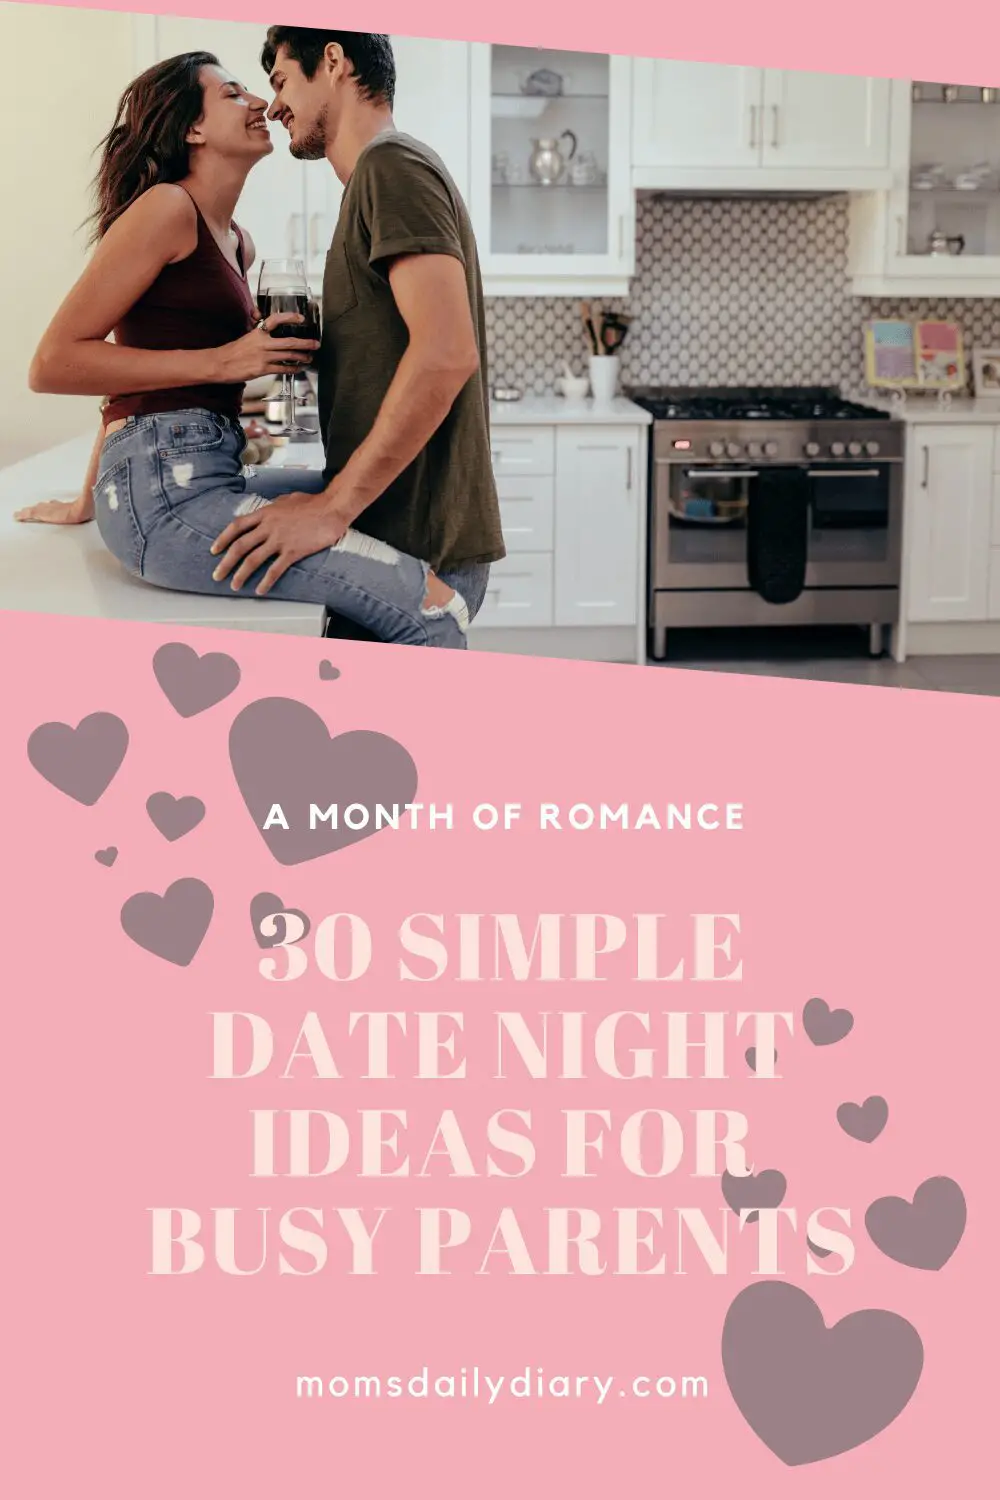 Has you love life turned to a routine around your kids? Then you definitely need this month-worth list of date night ideas for busy parents.